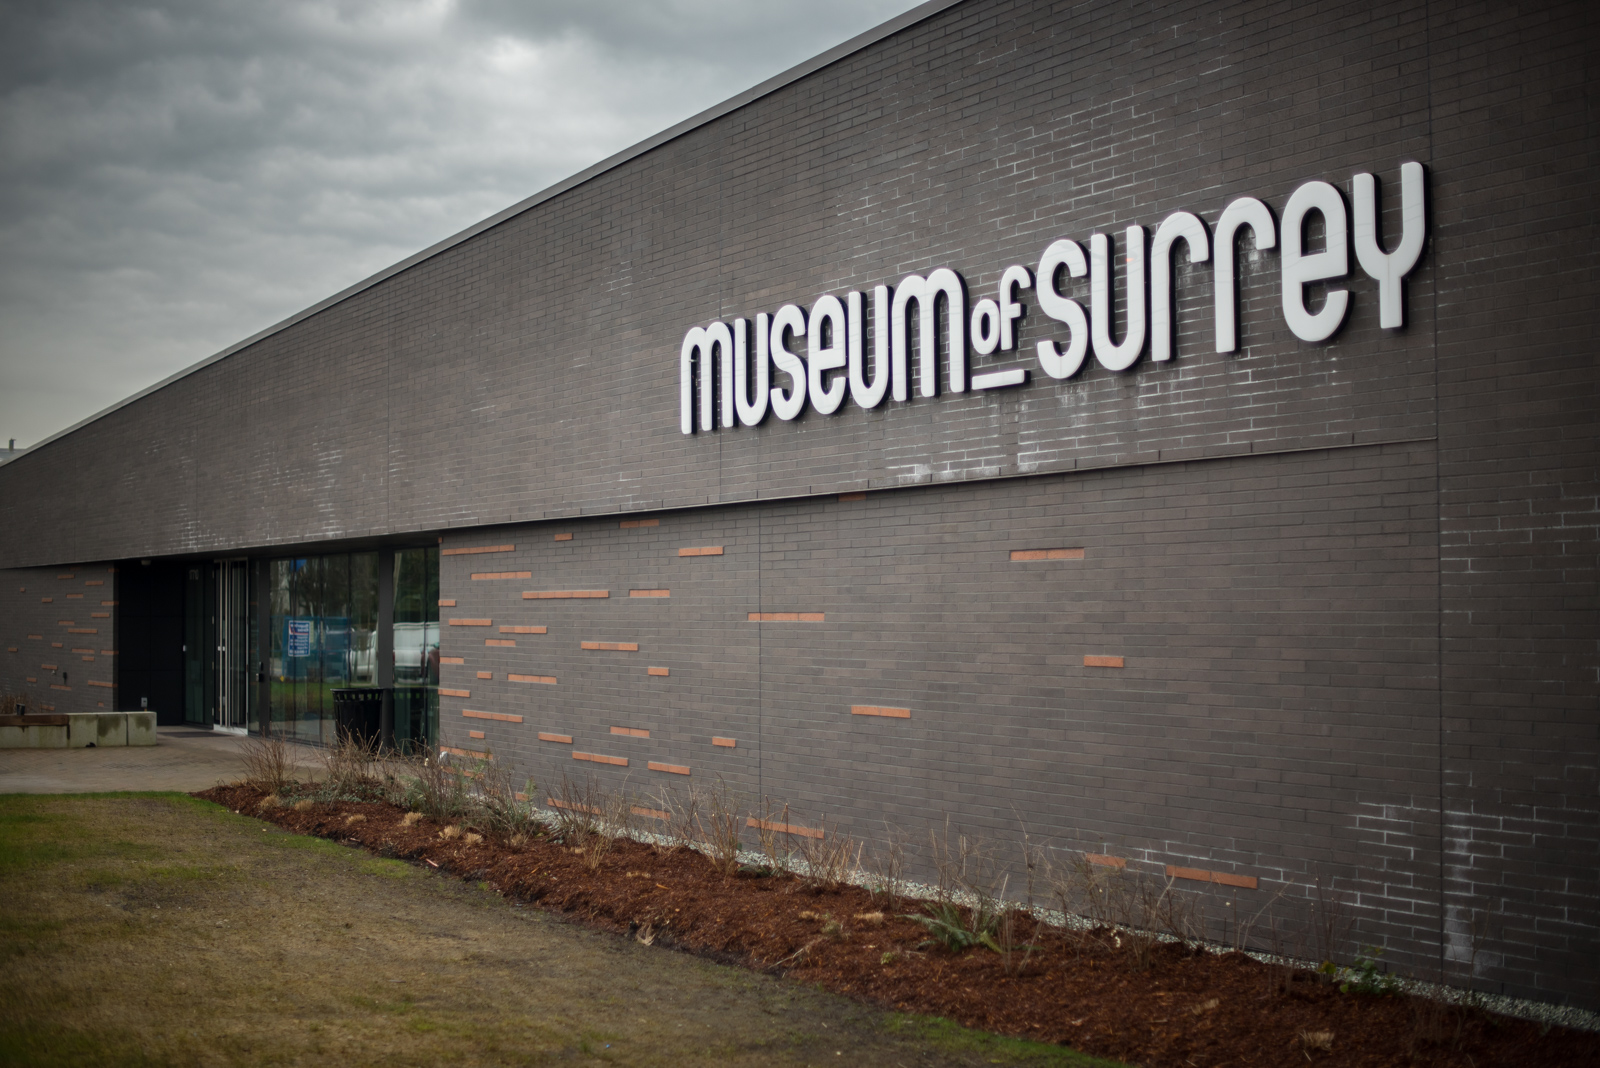 Exterior of the Museum of Surrey